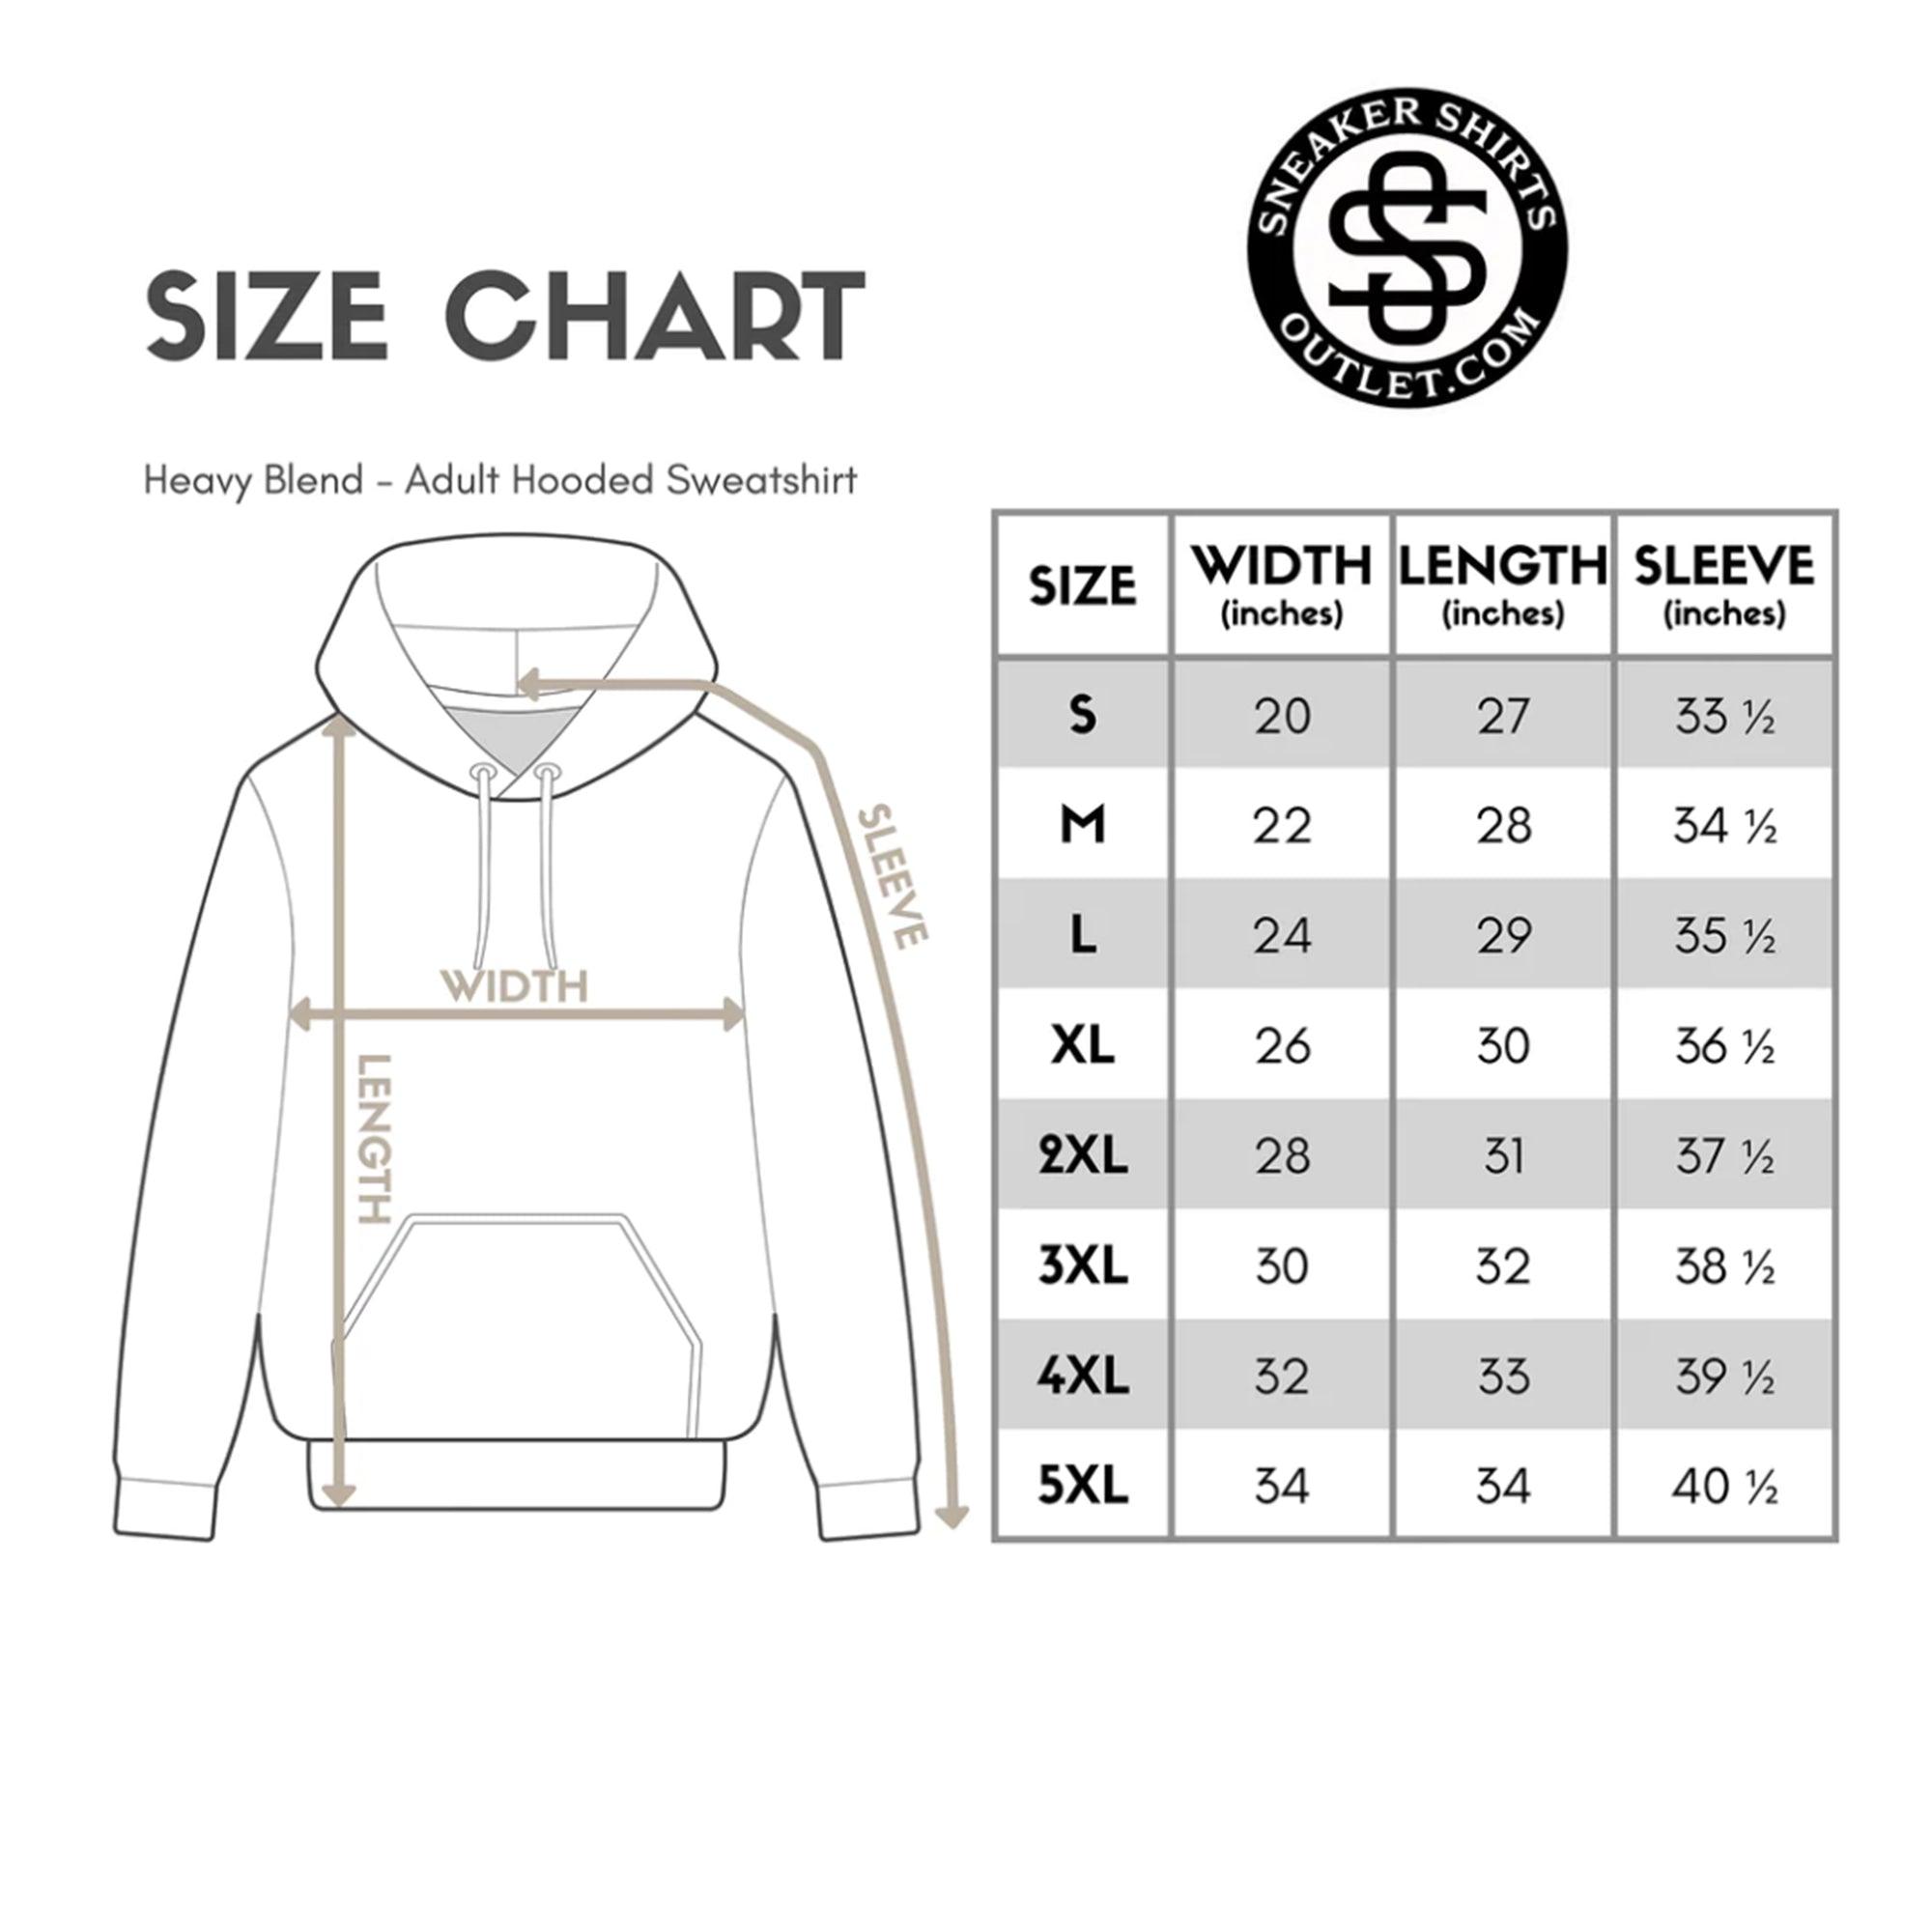 size chart 23 Melting Hoodie AJ 1 Low Limelight photo